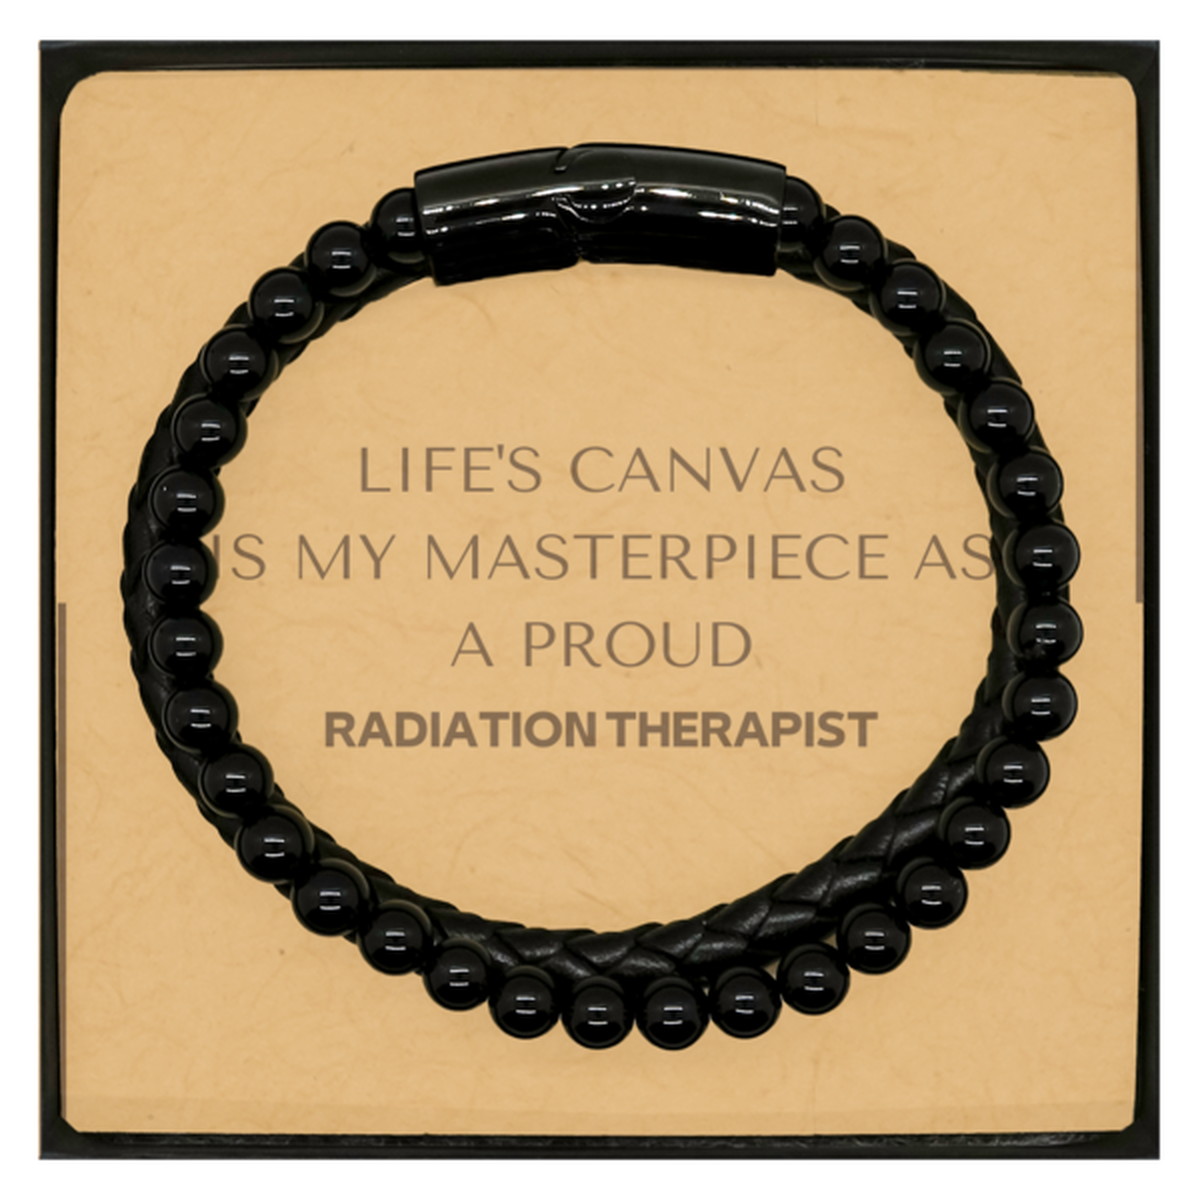 Proud Radiation Therapist Gifts, Life's canvas is my masterpiece, Epic Birthday Christmas Unique Stone Leather Bracelets For Radiation Therapist, Coworkers, Men, Women, Friends